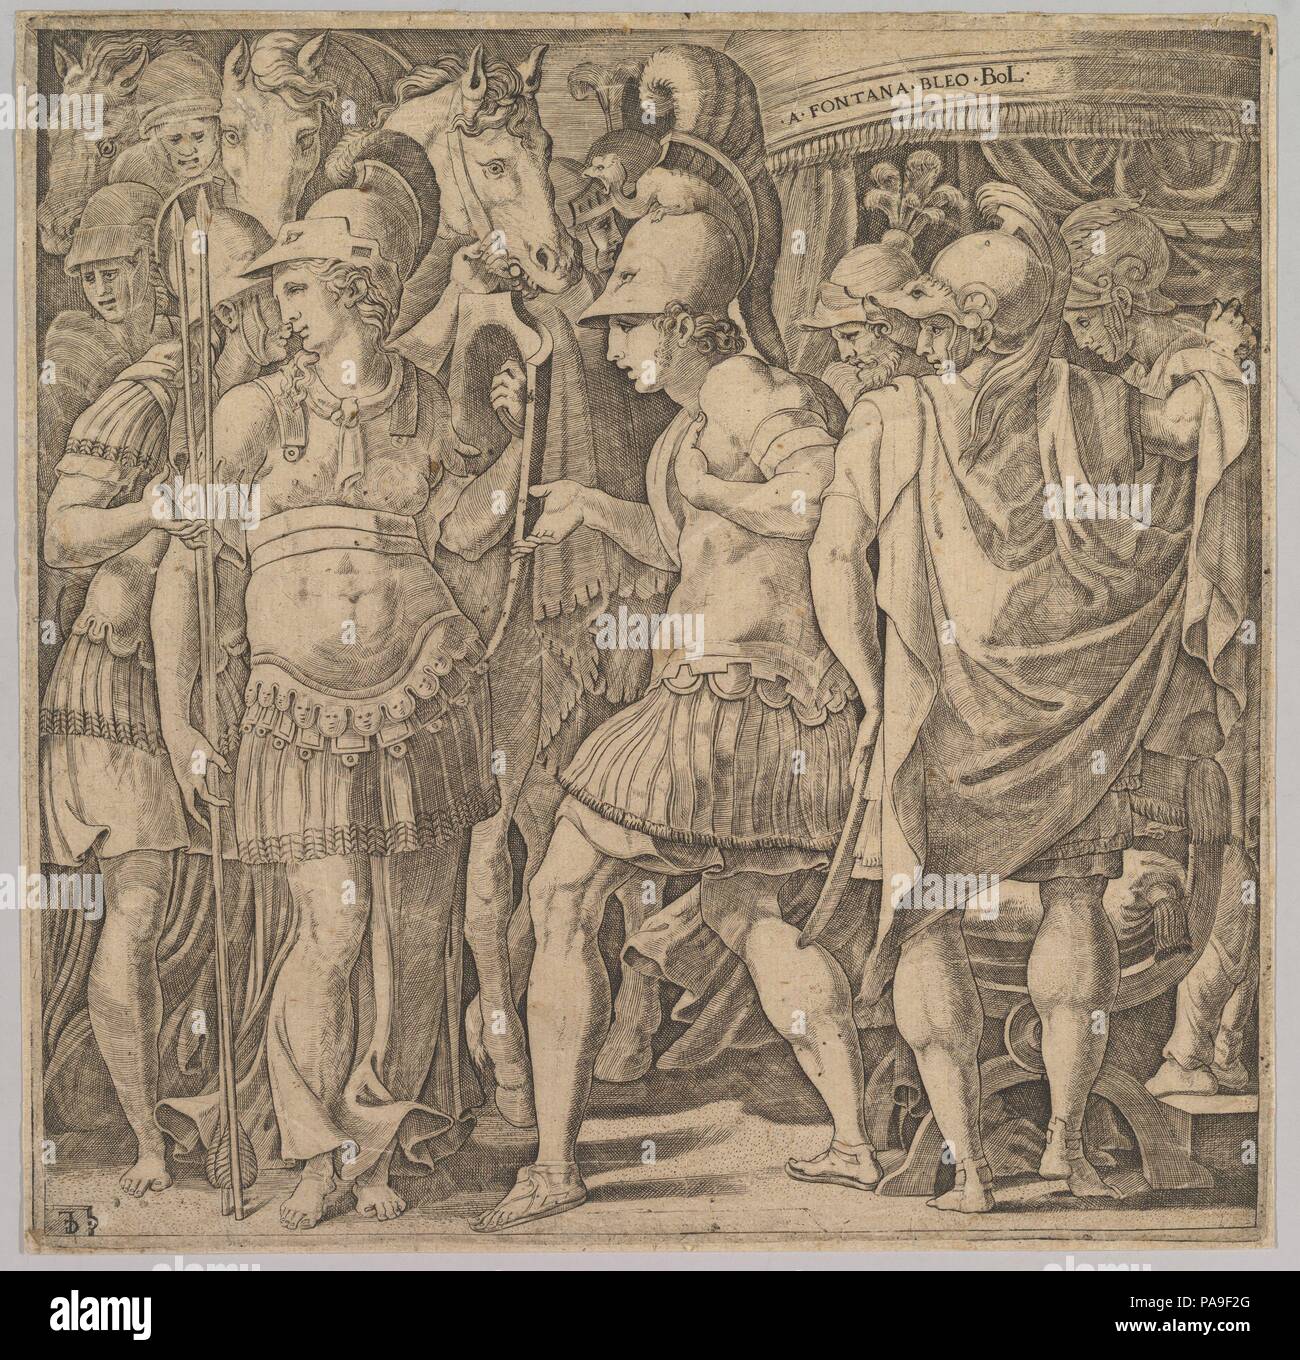 Alexander welcoming Thalestris and the Amazons. Artist: Master FG (Italian, active mid-16th century); After Francesco Primaticcio (Italian, Bologna 1504/5-1570 Paris). Dimensions: sheet: 9 7/16 x 9 7/16 in. (24 x 24 cm). Date: mid-16th century. Museum: Metropolitan Museum of Art, New York, USA. Stock Photo